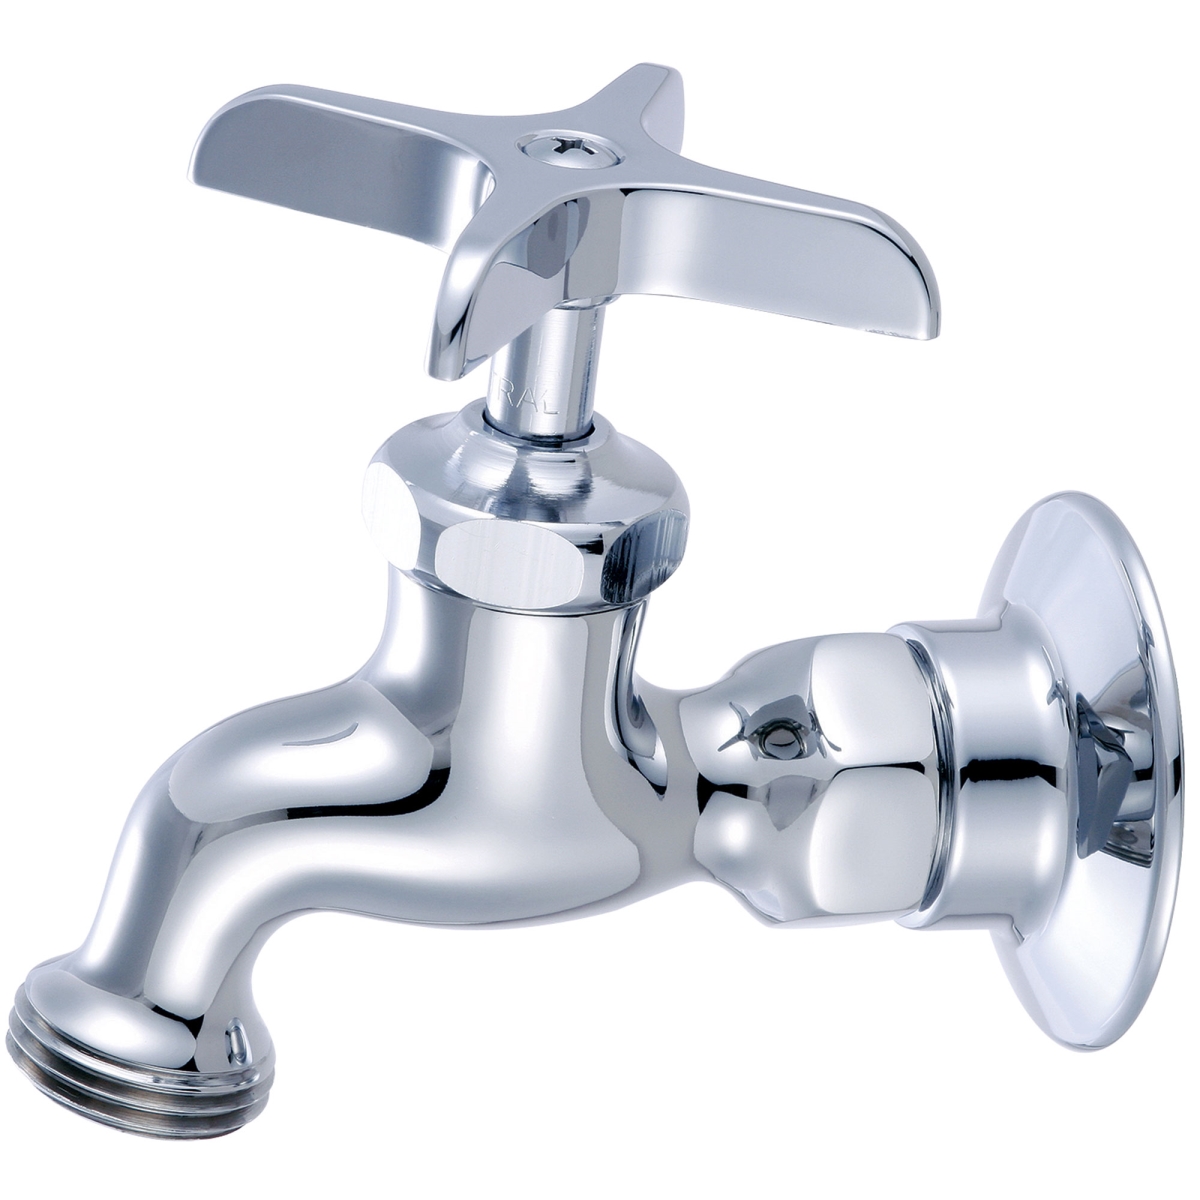 UPC 763439000033 product image for 0005-H1-2P Single Handle Wall Mount Faucet, Chrome | upcitemdb.com